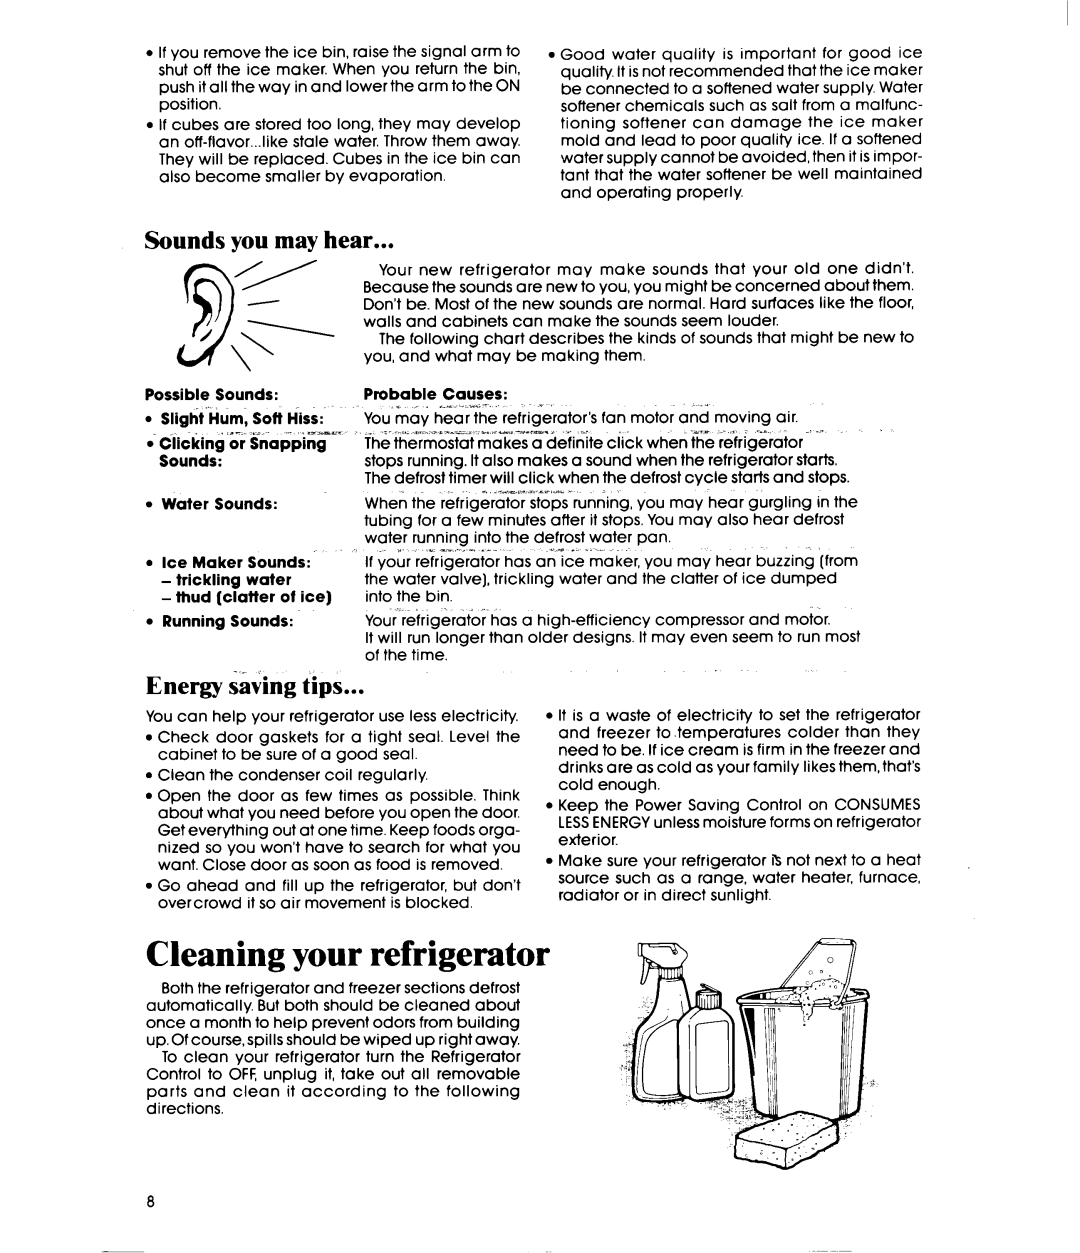 Whirlpool ET20GM manual Cleaning your refrigerator, Sounds you may hear, Energy saving tips 